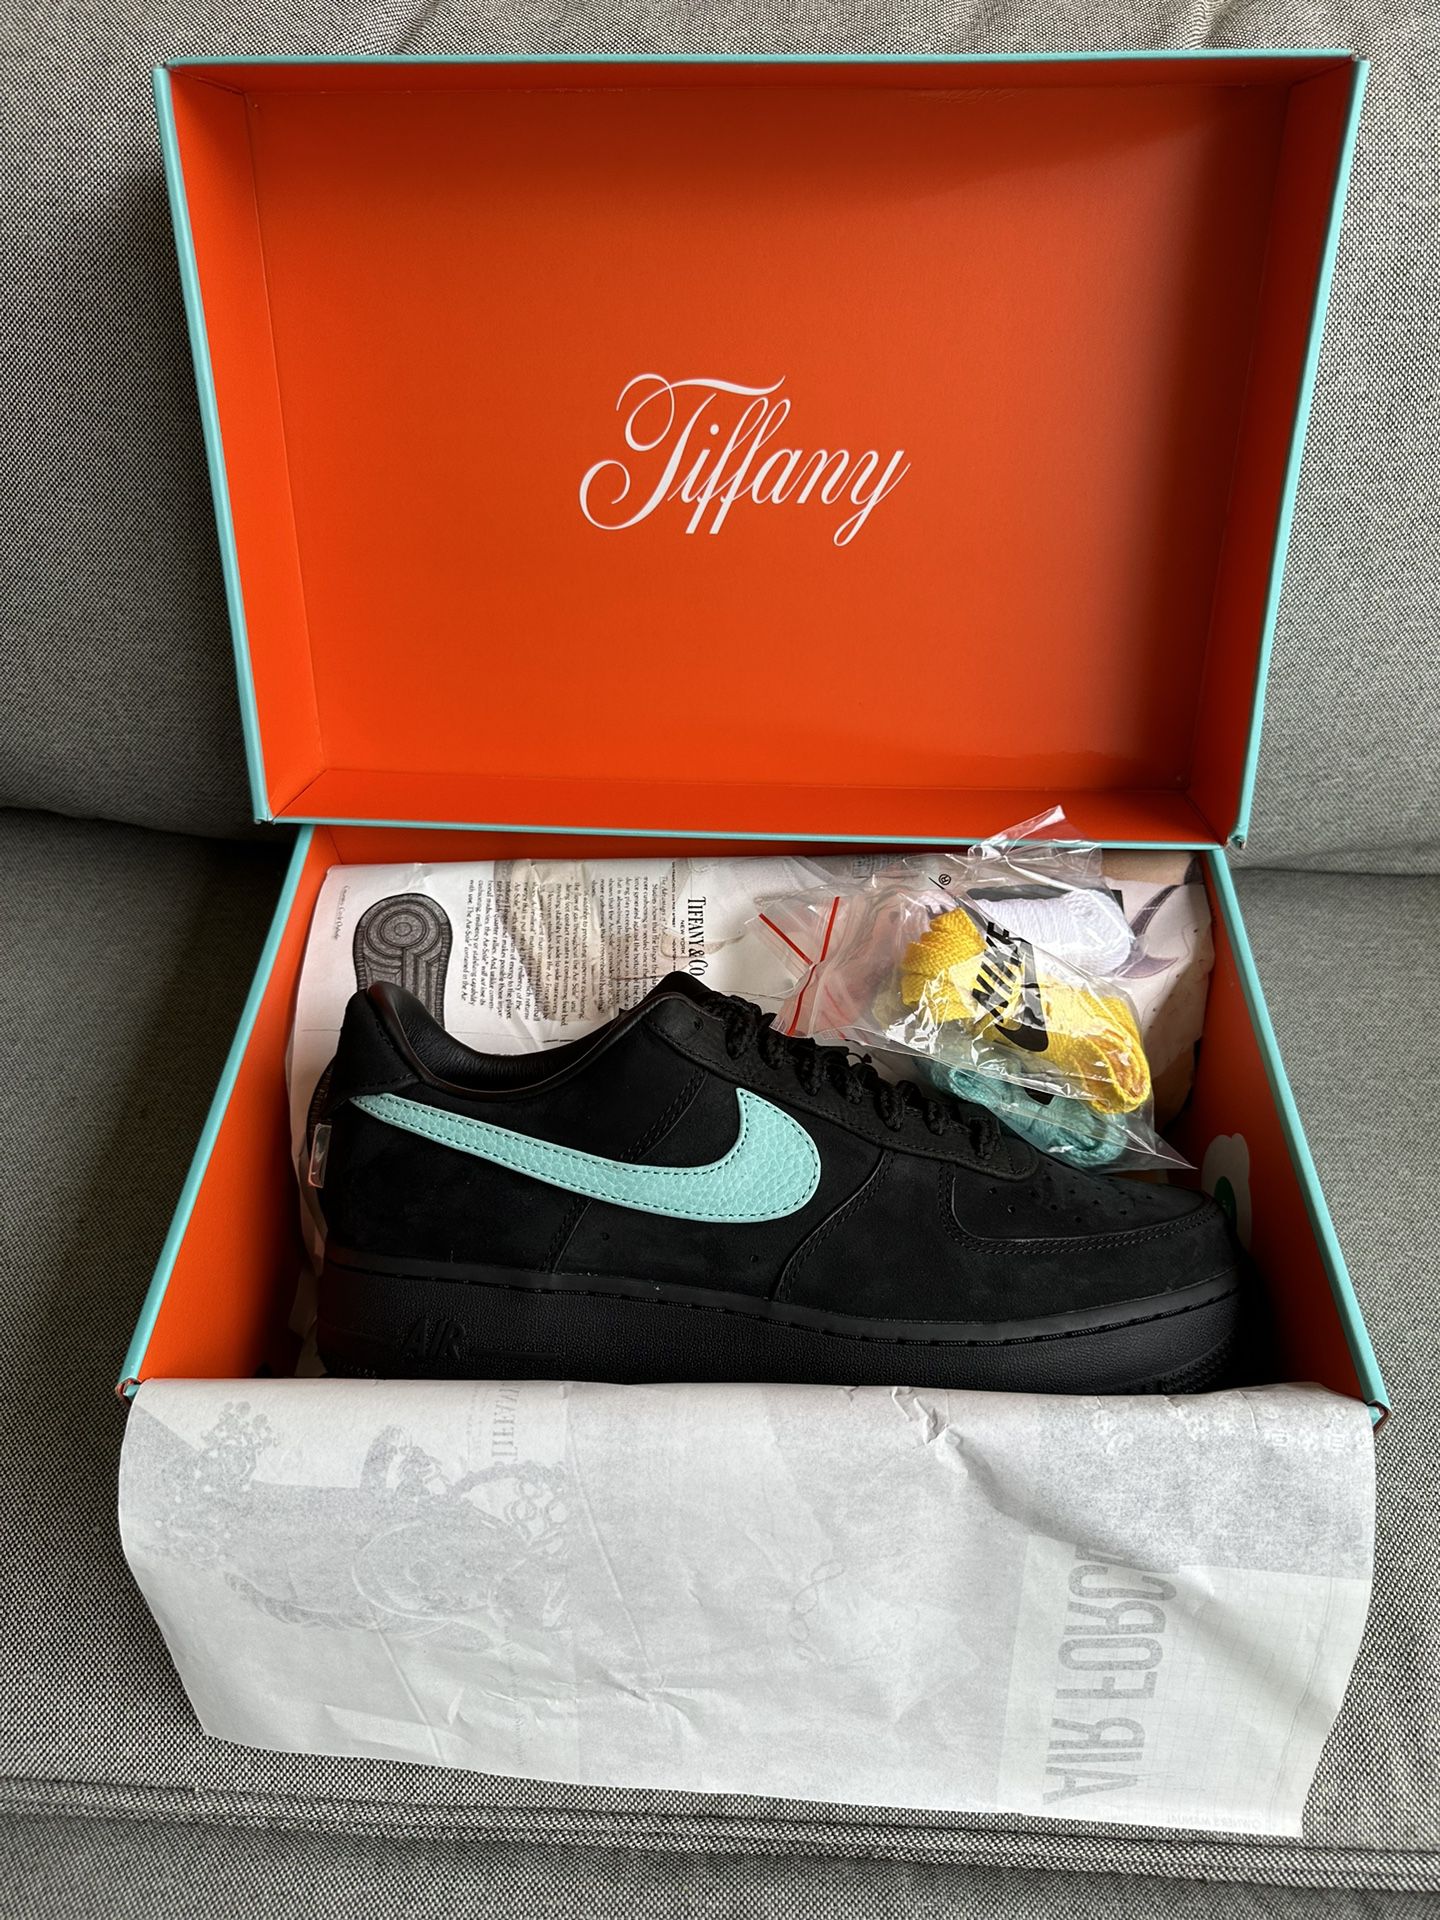 Nike Air Force 1 Low Tiffany & Co. 1837 9.5